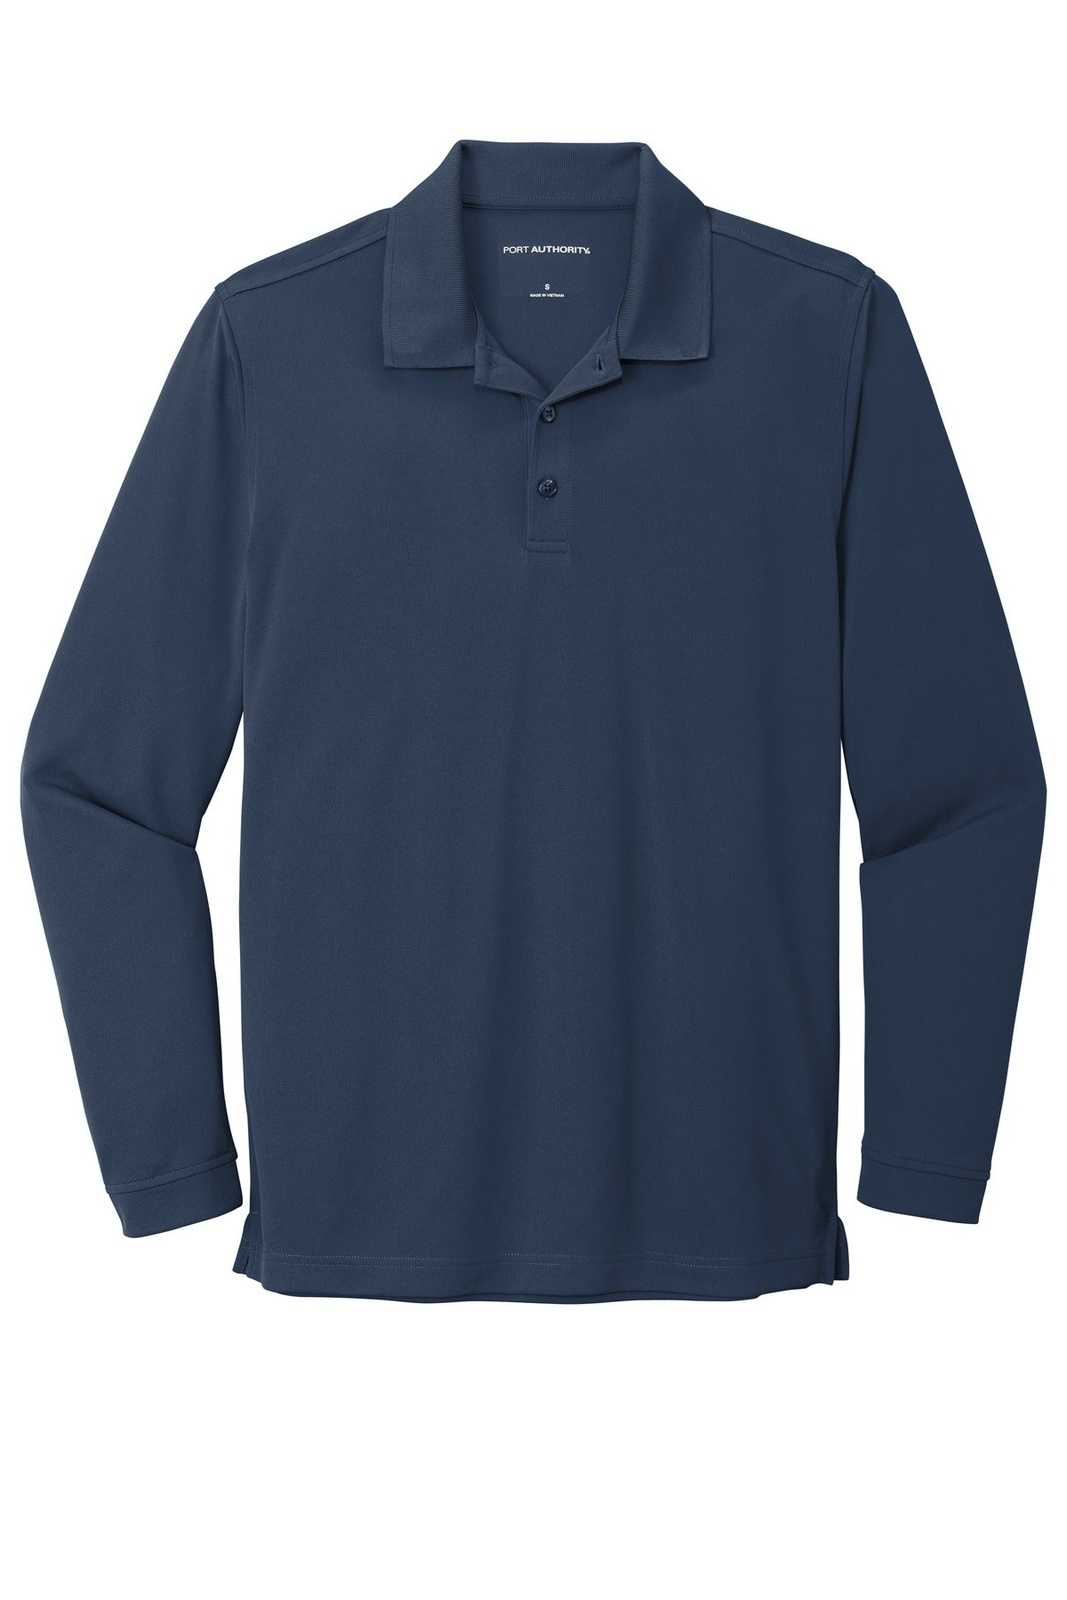 Port Authority K110LS Dry Zone UV Micro-Mesh Long Sleeve Polo - River Blue Navy - HIT a Double - 5